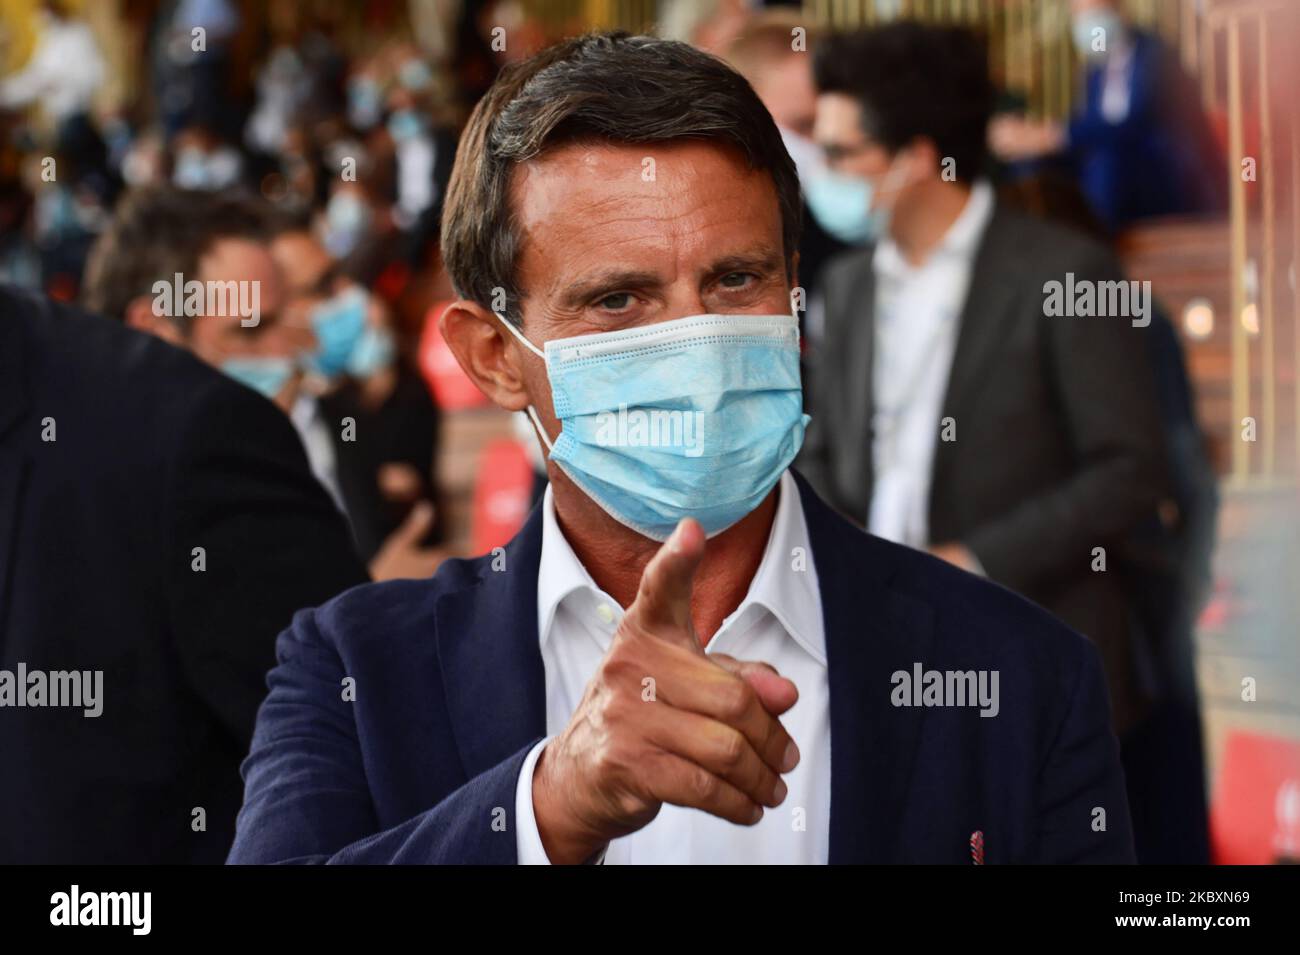 Former French Prime Minister Manuel Valls attends at the meeting of French employers' association Medef themed 'The Renaissance of French Companies' on August 27, 2020, in Paris, France. (Photo by Daniel Pier/NurPhoto) Stock Photo